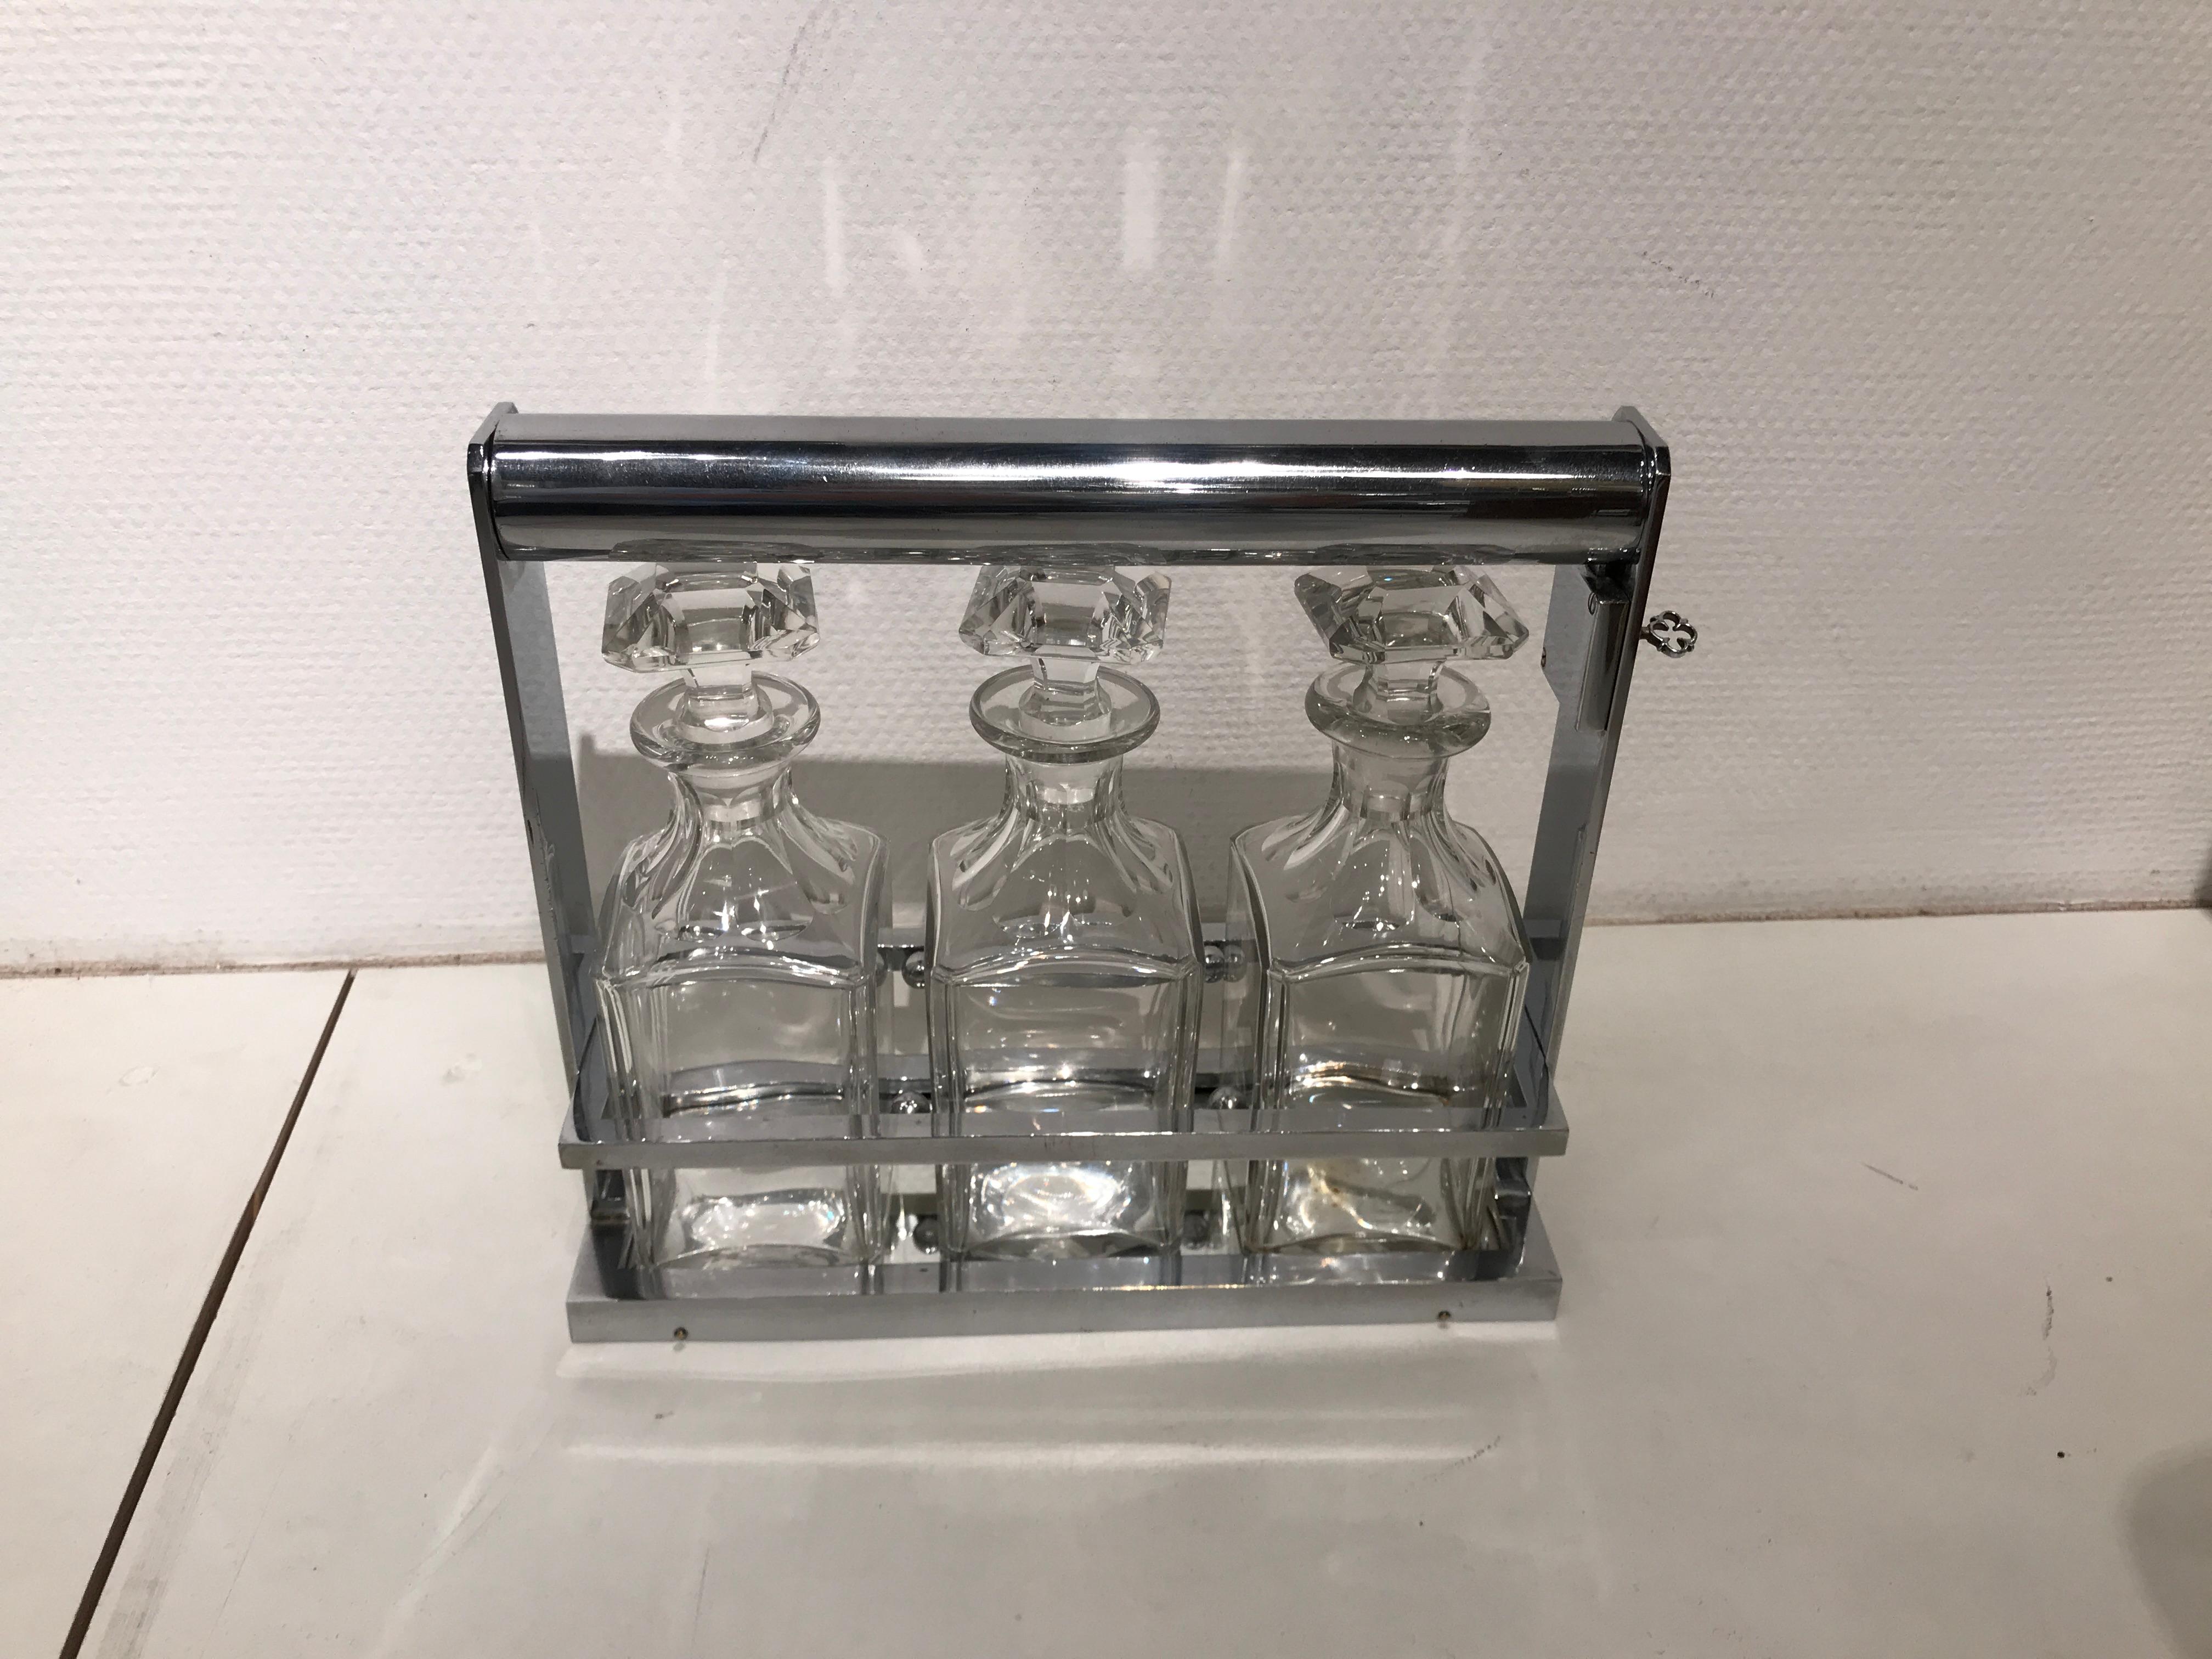 Nice Baccarat crystal and Jacques Adnet liquor bottles set, circa 1930.
In perfect and original conditions. With key.